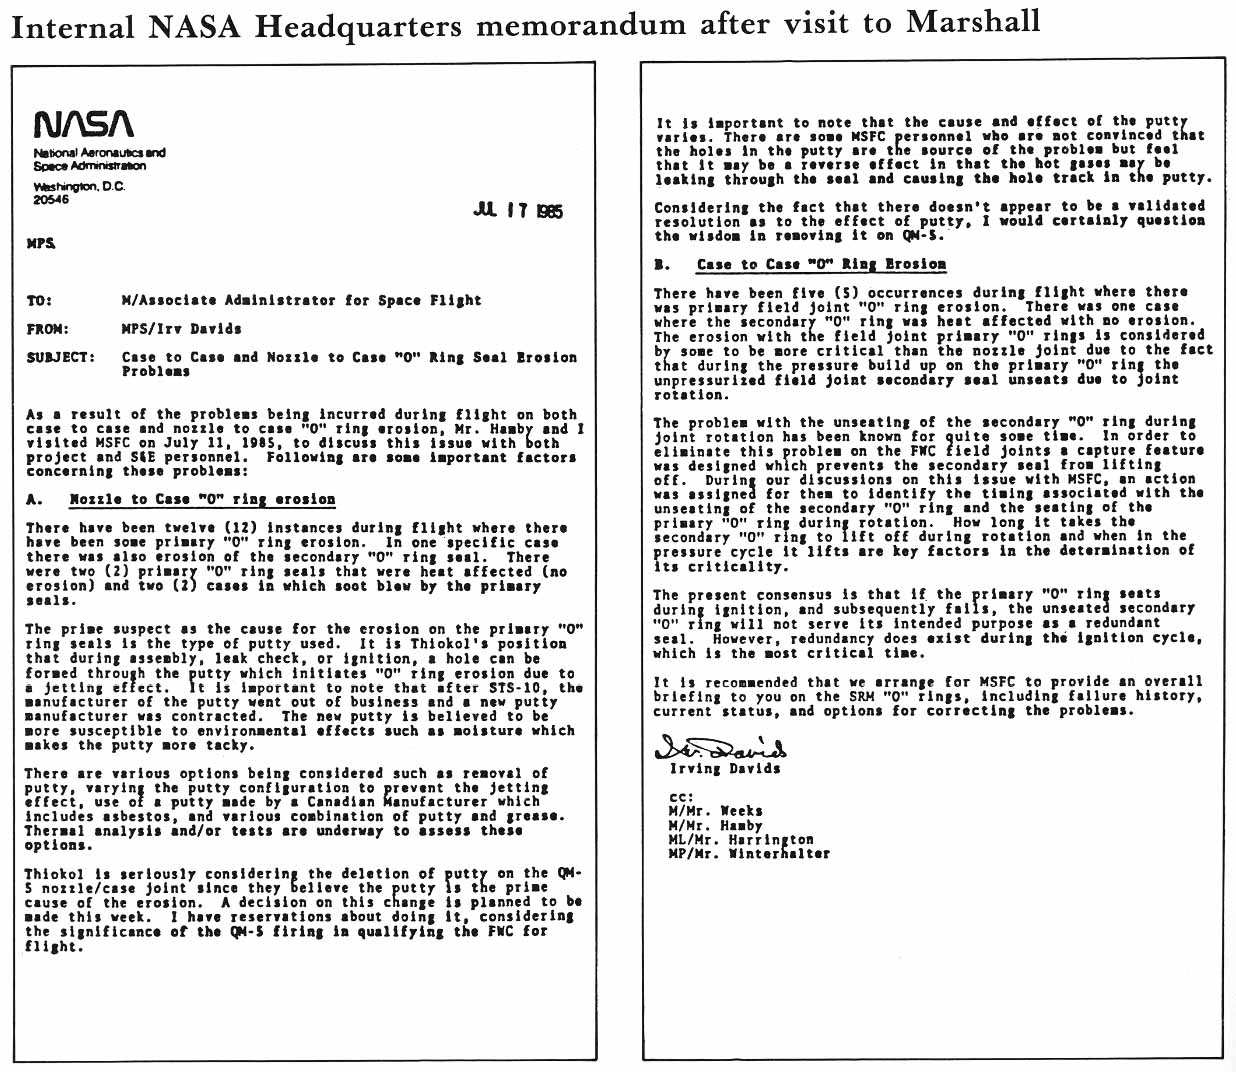 This memorandum to Level I describes a visit to Marshall by Irving Davids of NASA Headquarters. Davids' visit was prompted by the nozzle O-ring problems suffered on STS 51-B (flight 17).